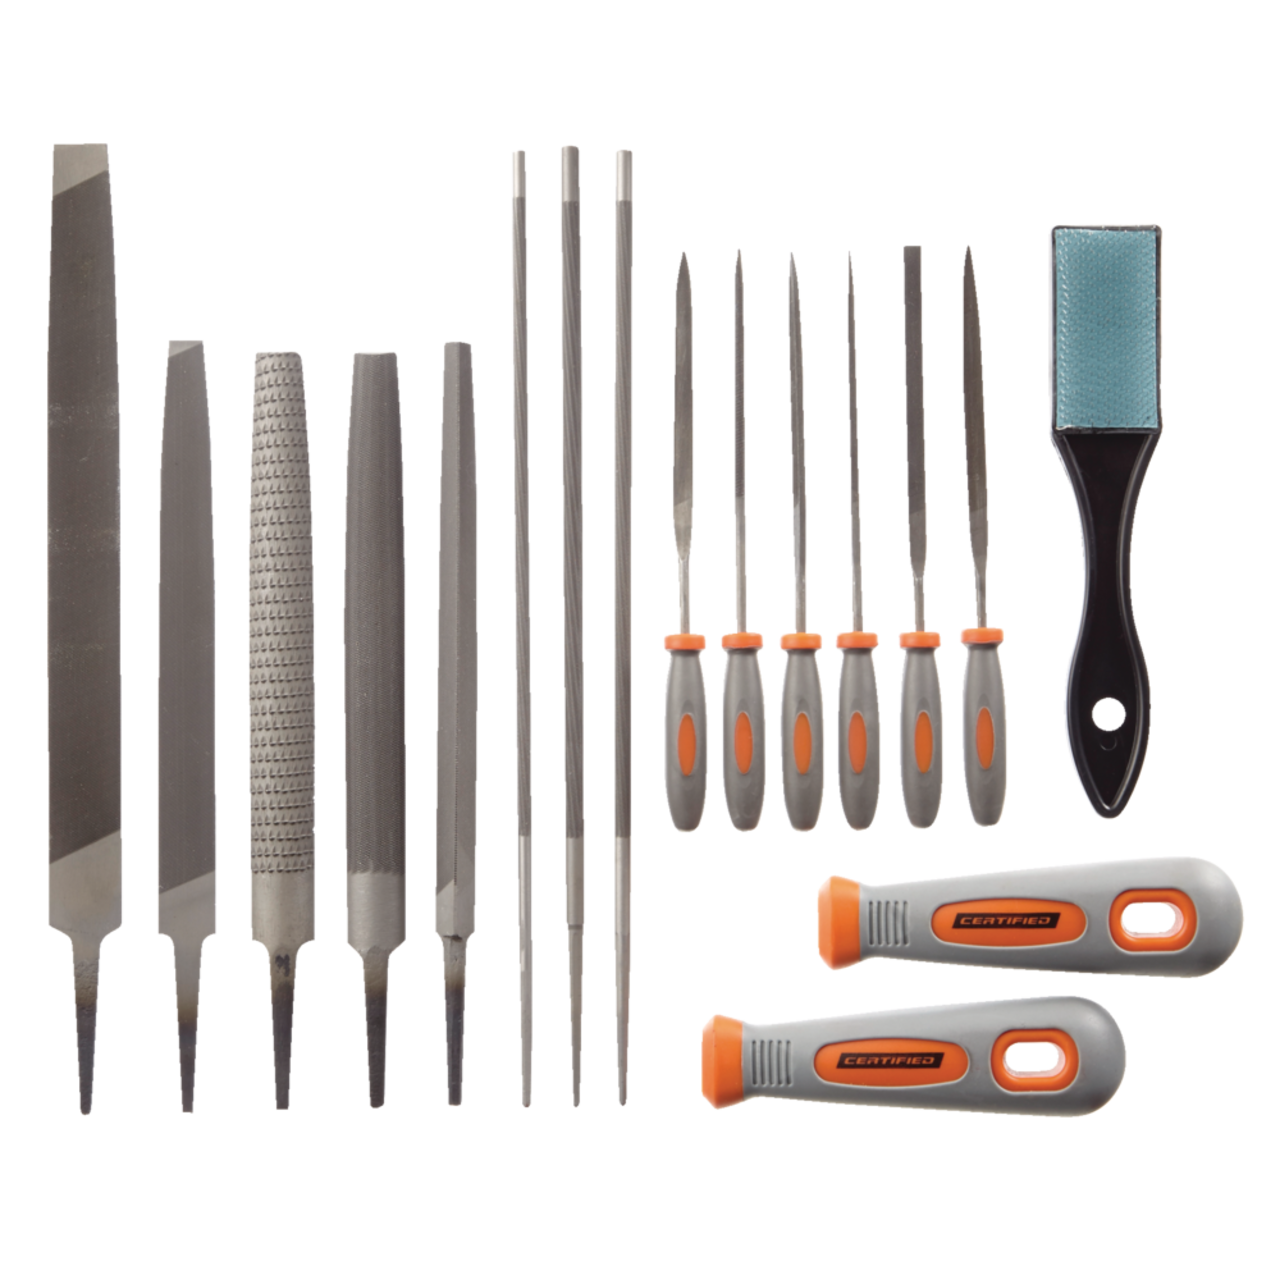 https://media-www.canadiantire.ca/product/fixing/tools/metal-working/0582803/certified-17-piece-file-set-9a42f3d3-011a-48f8-b38a-c63dd1a72234.png?imdensity=1&imwidth=640&impolicy=mZoom